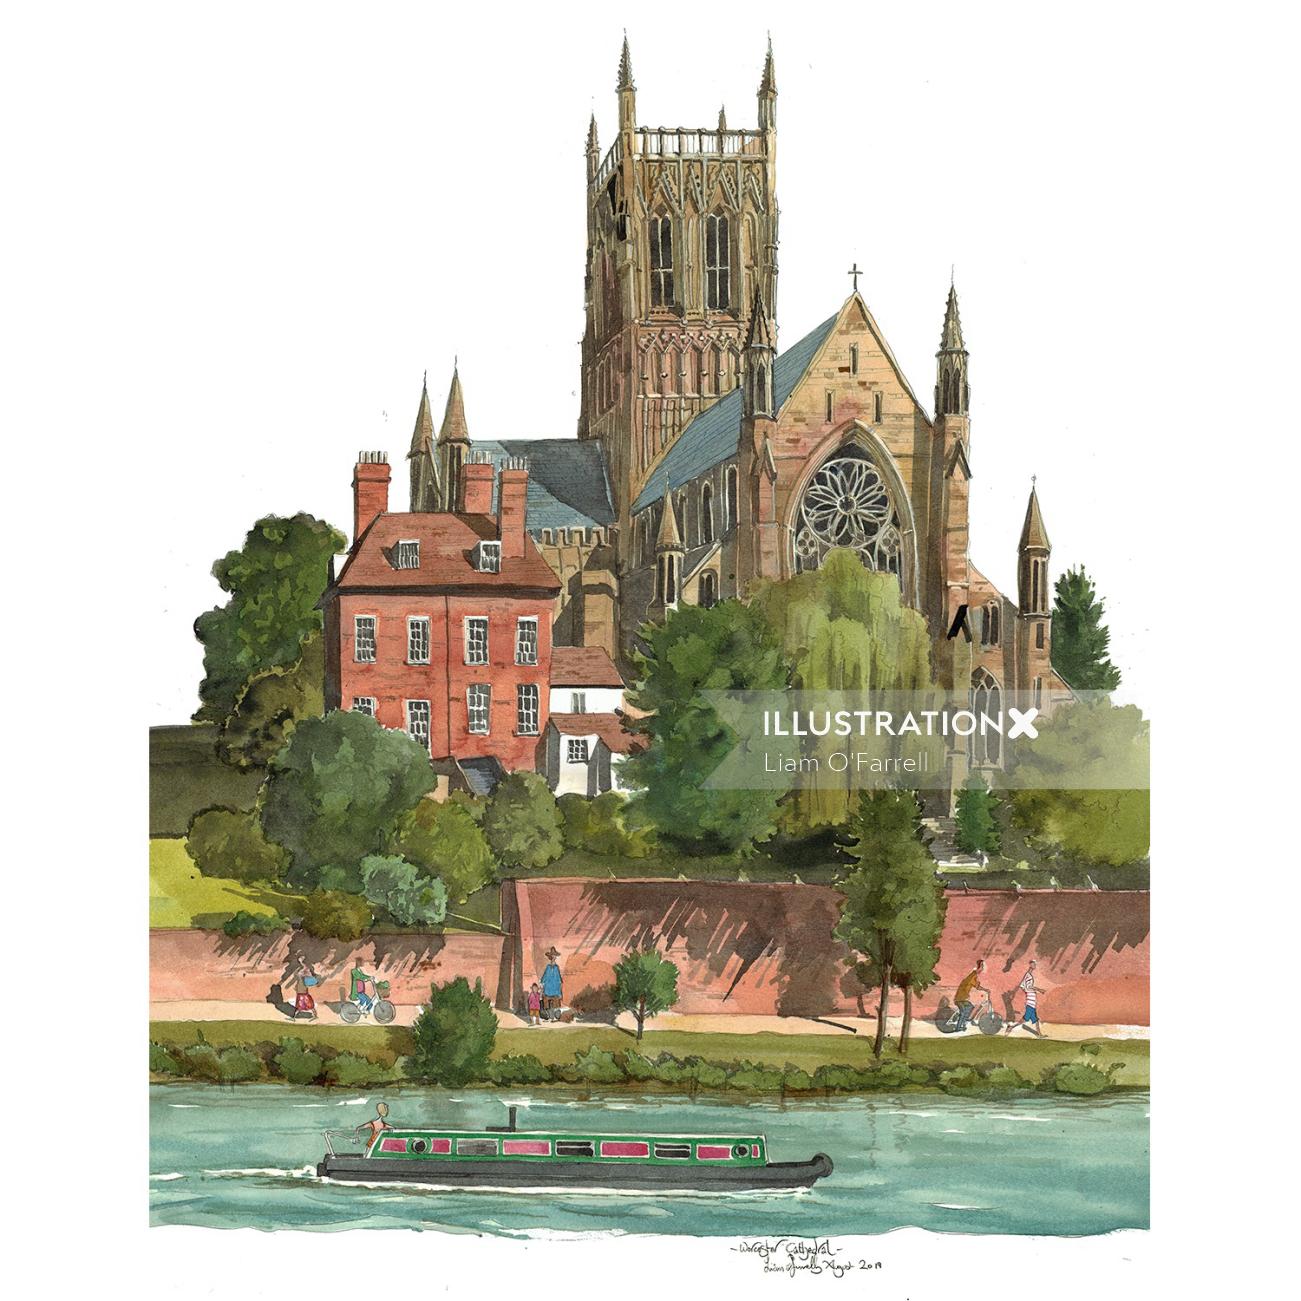 A painting of Worcester Cathedral on the river Severn